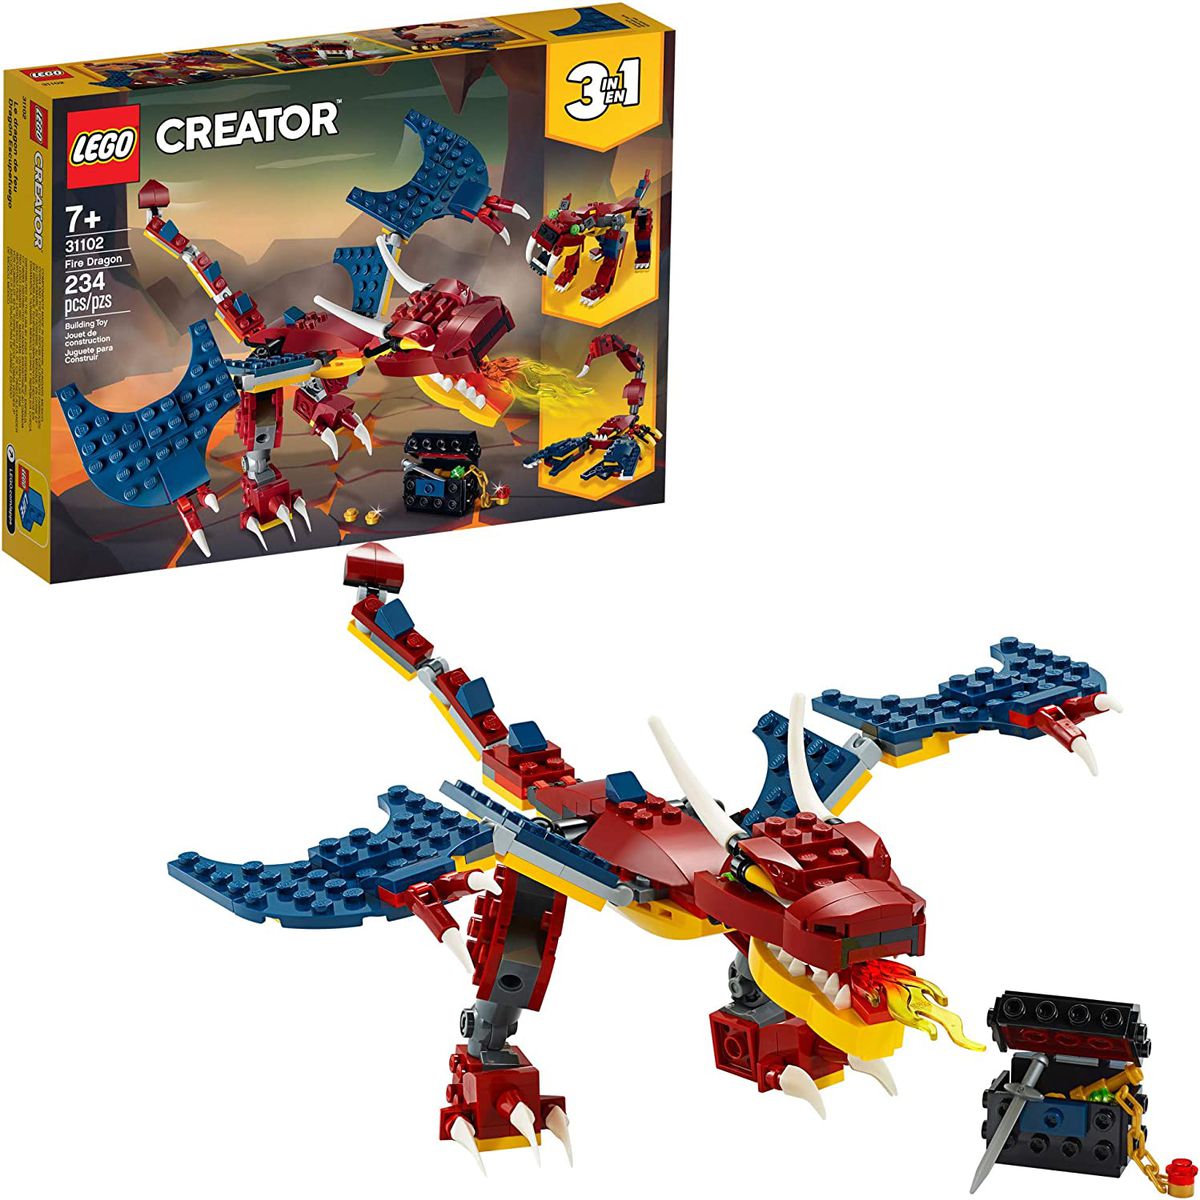 The box and one completed version of the 3-in-1 Fire Dragon set